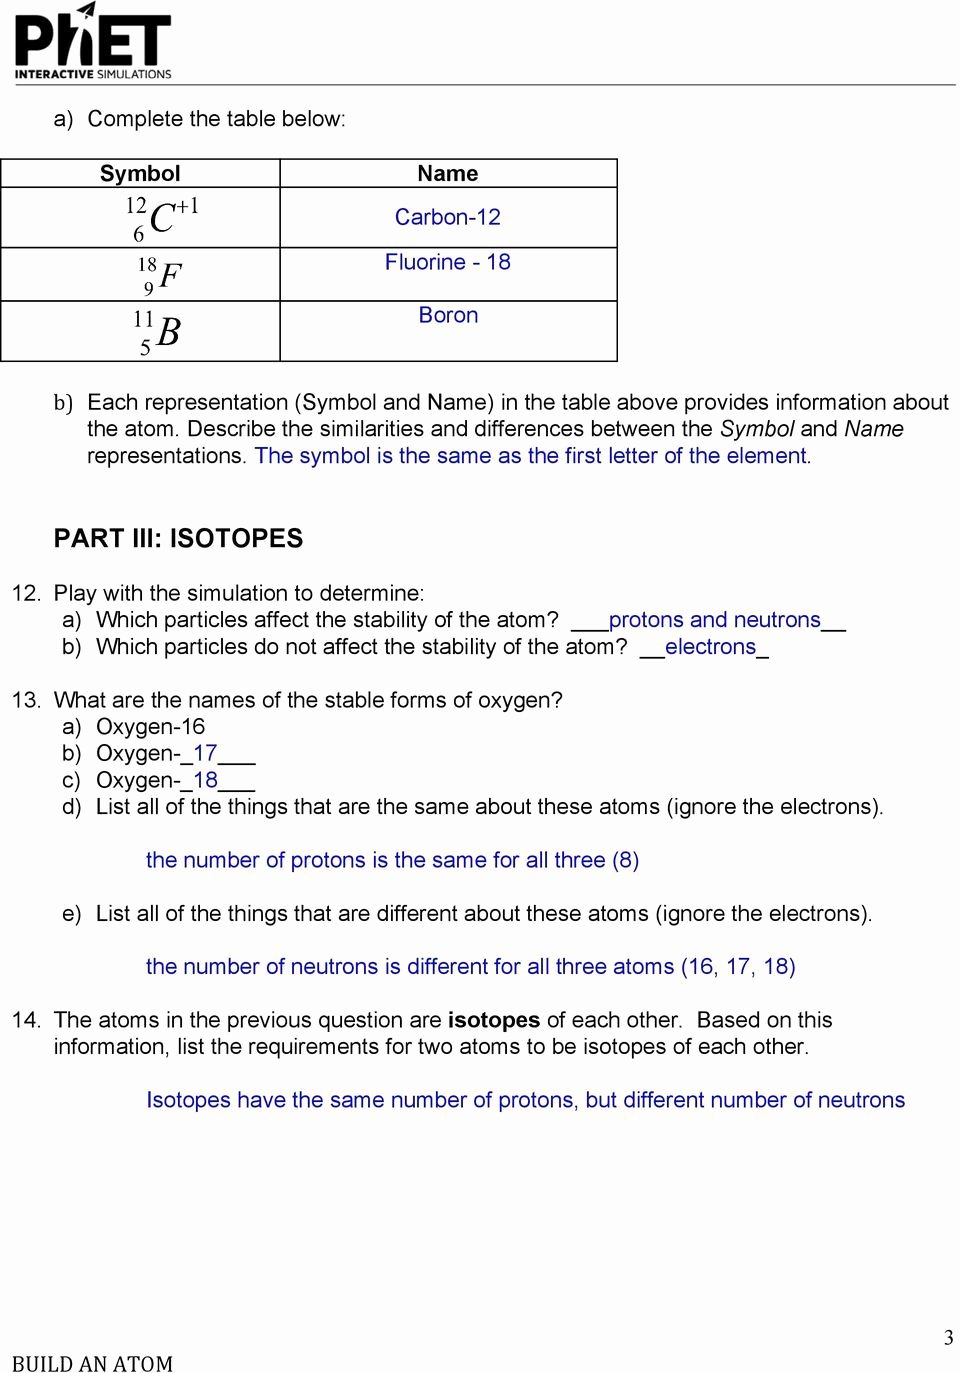 Phet Build An atom Worksheet Unique isotopes Different Elements Chapter 4 Worksheet Answers